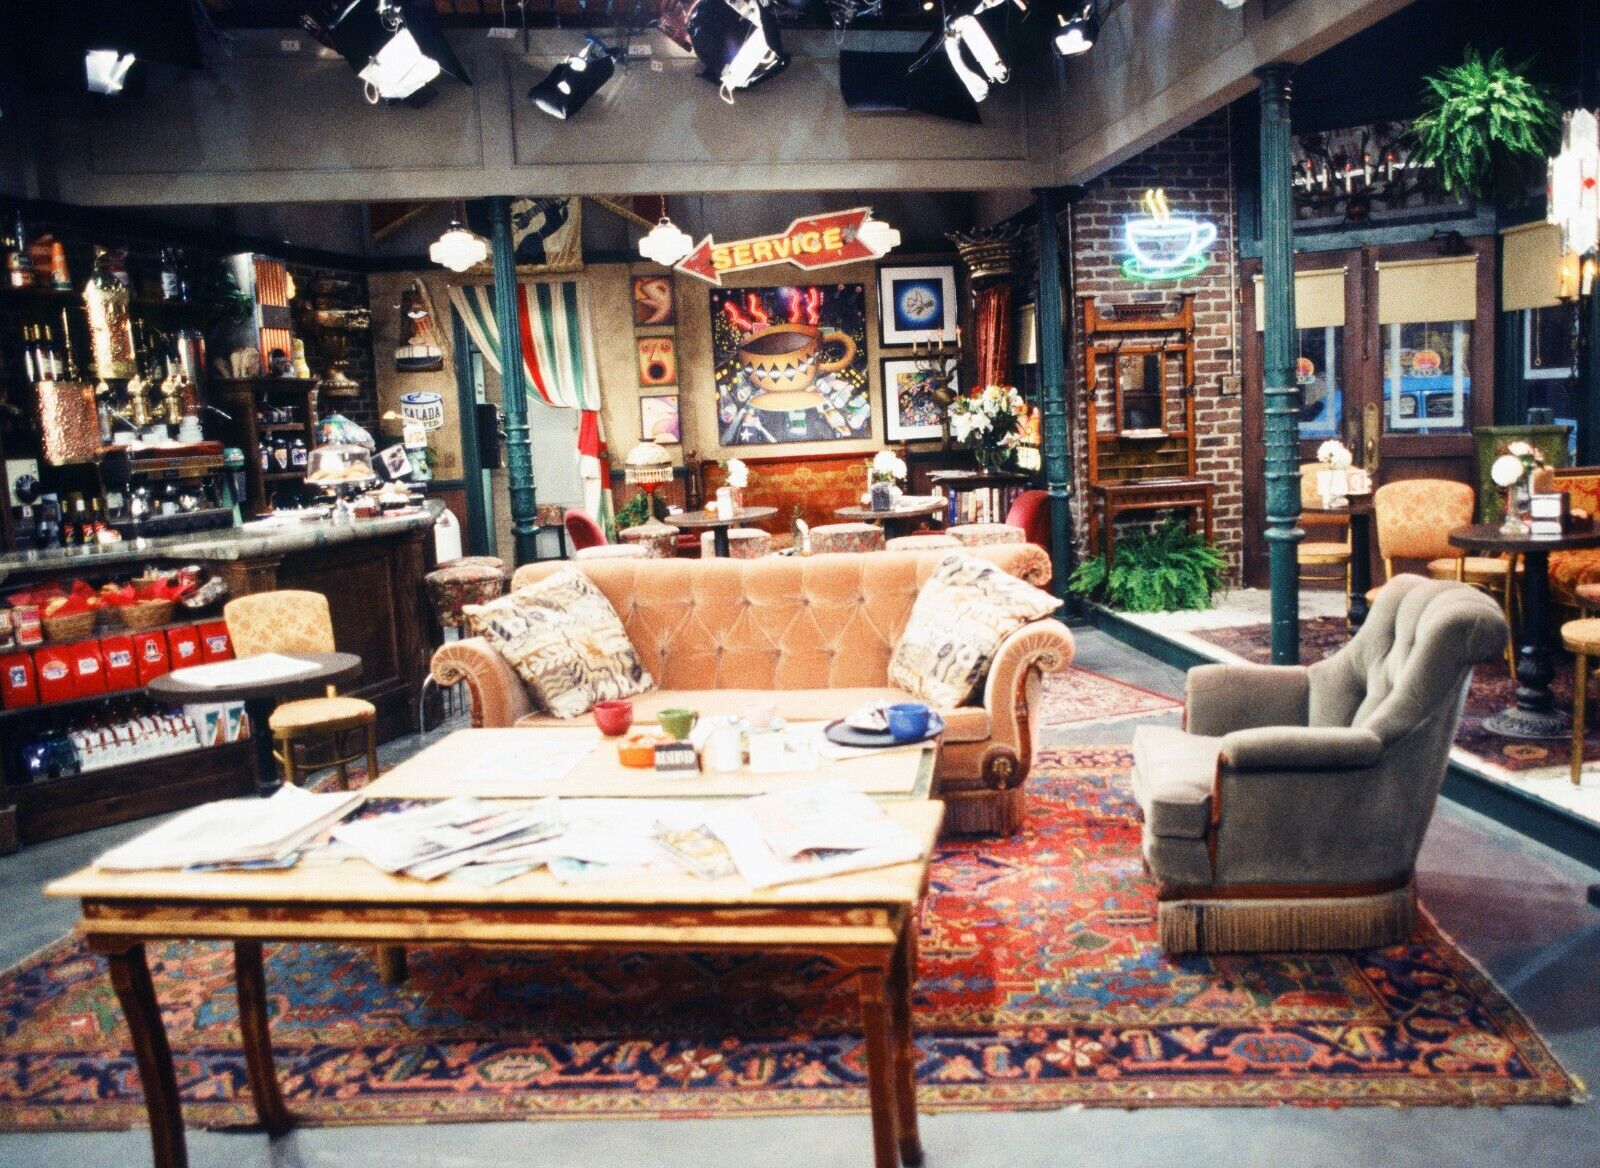 FRIENDS - TV SHOW PHOTO #E-16 - BEHIND THE SCENES